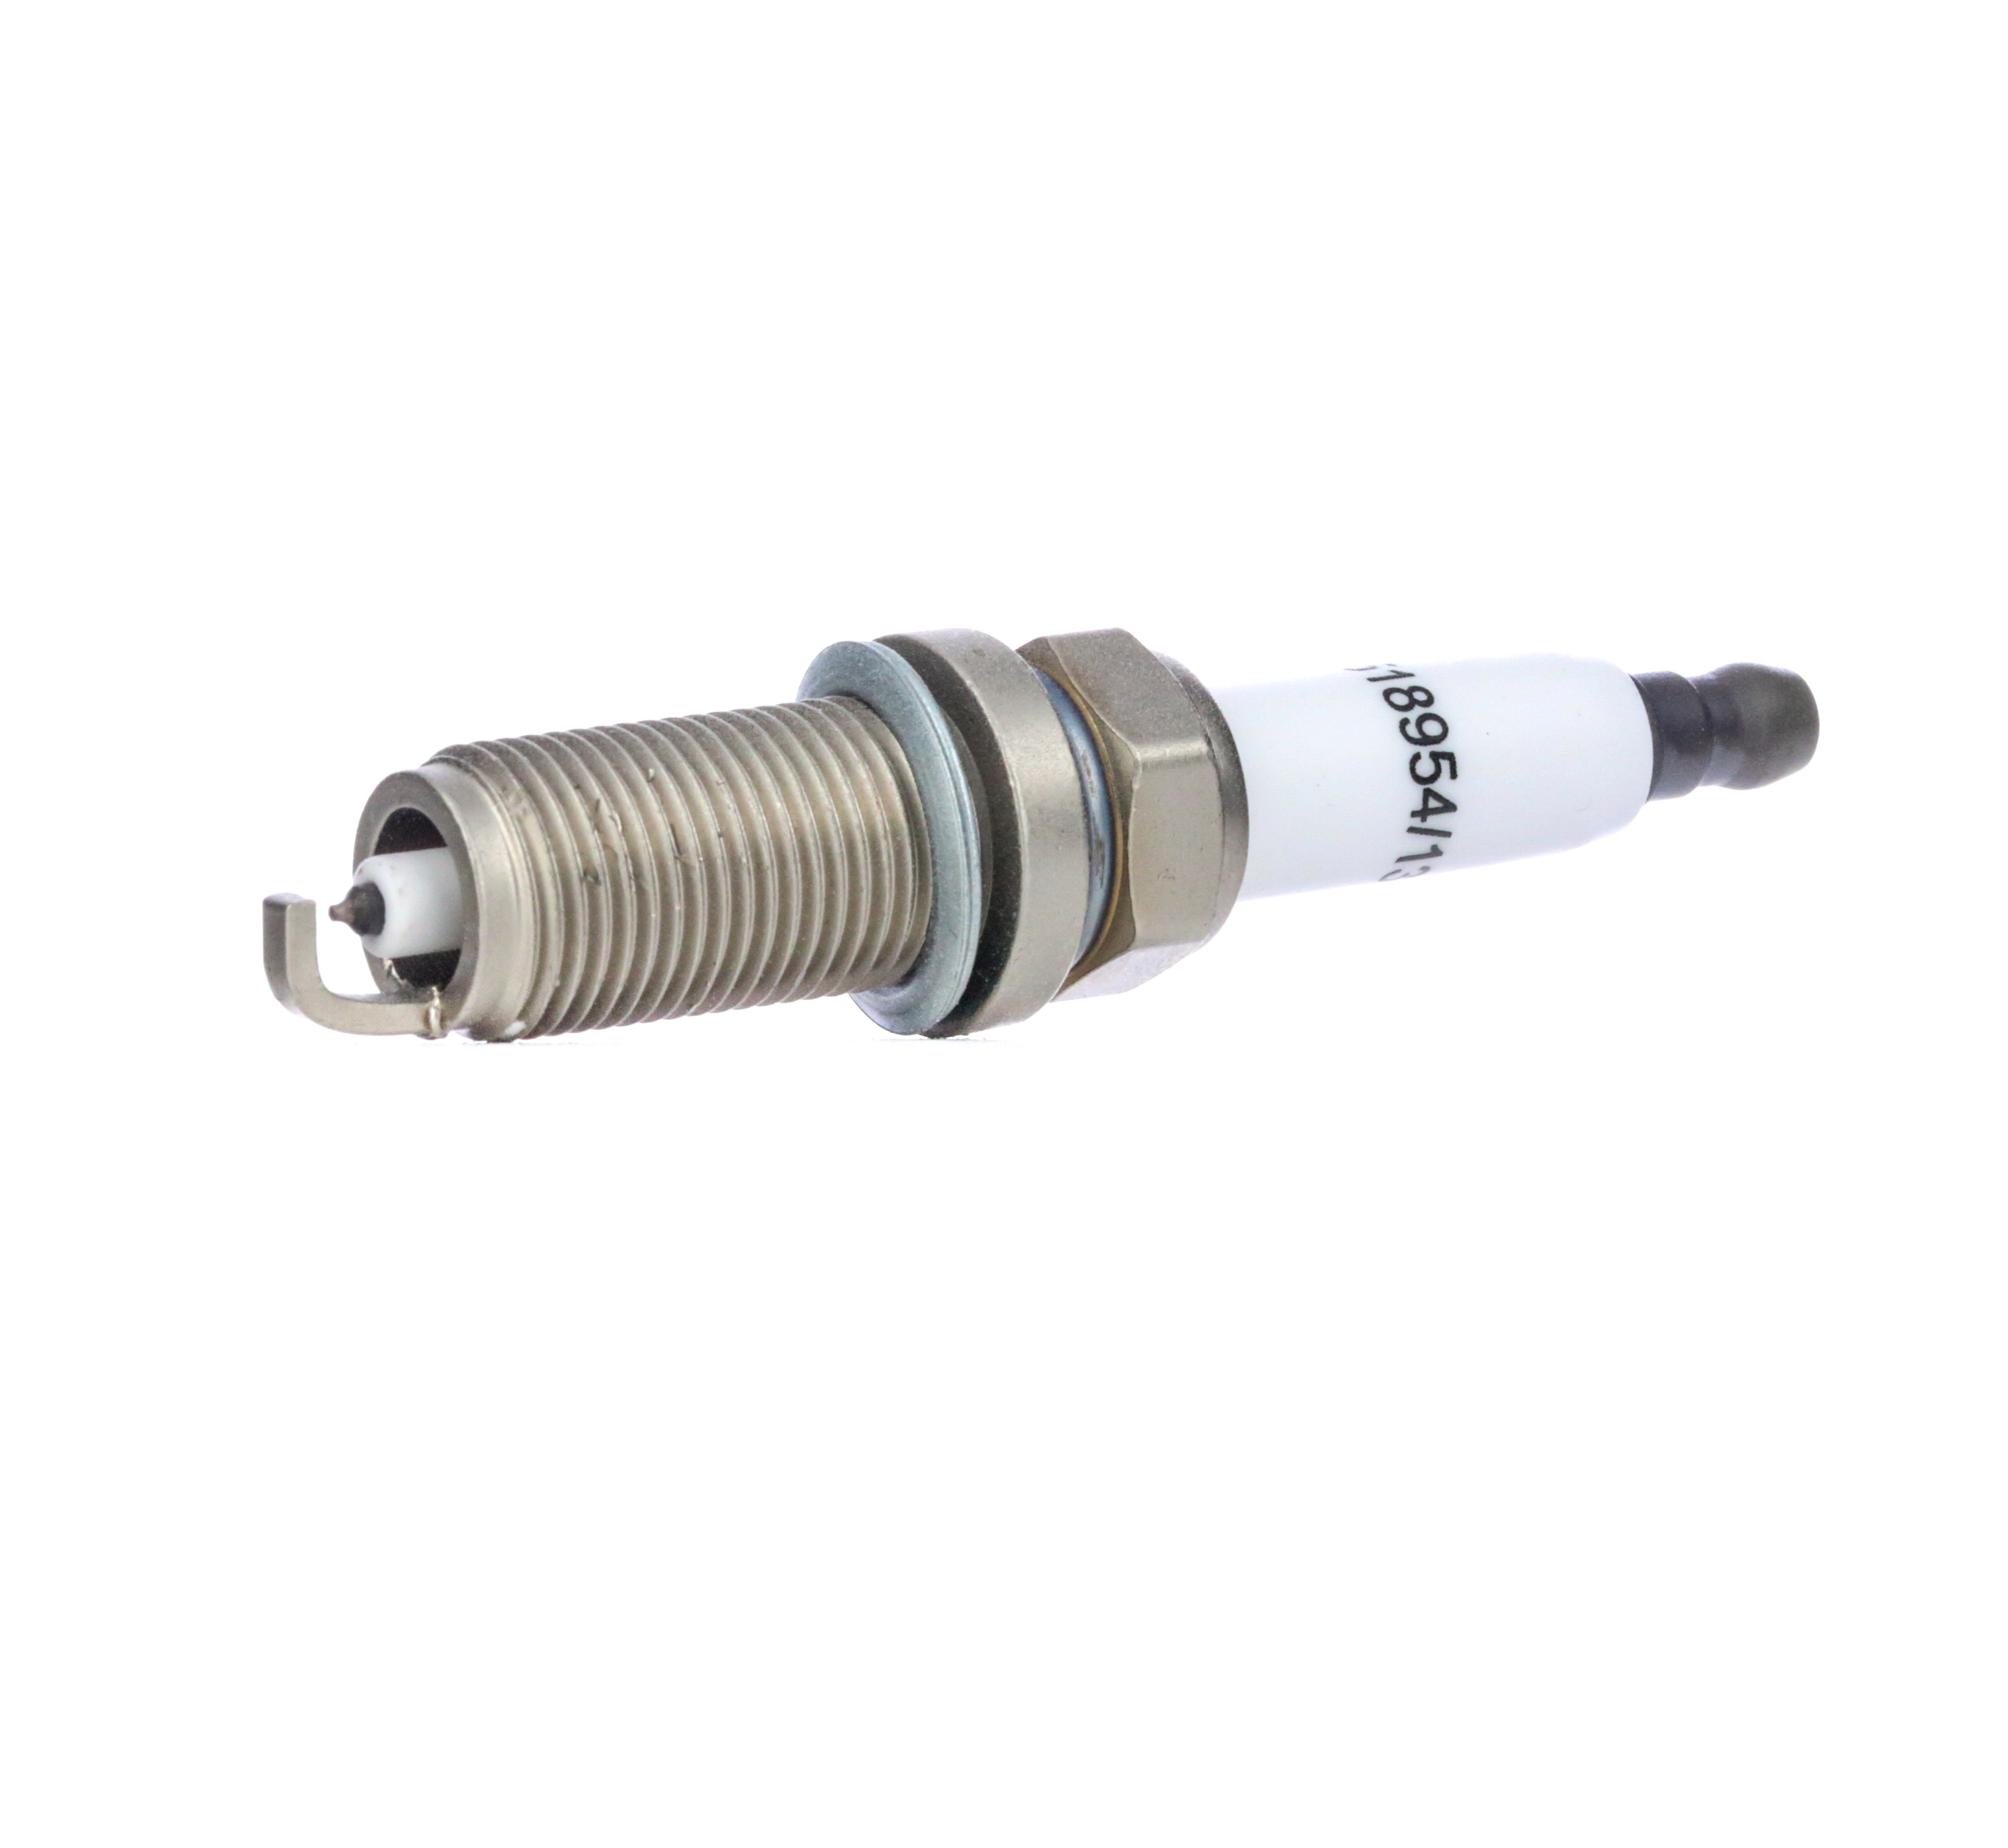 RIDEX 686S0051 Spark plug cheap in online store